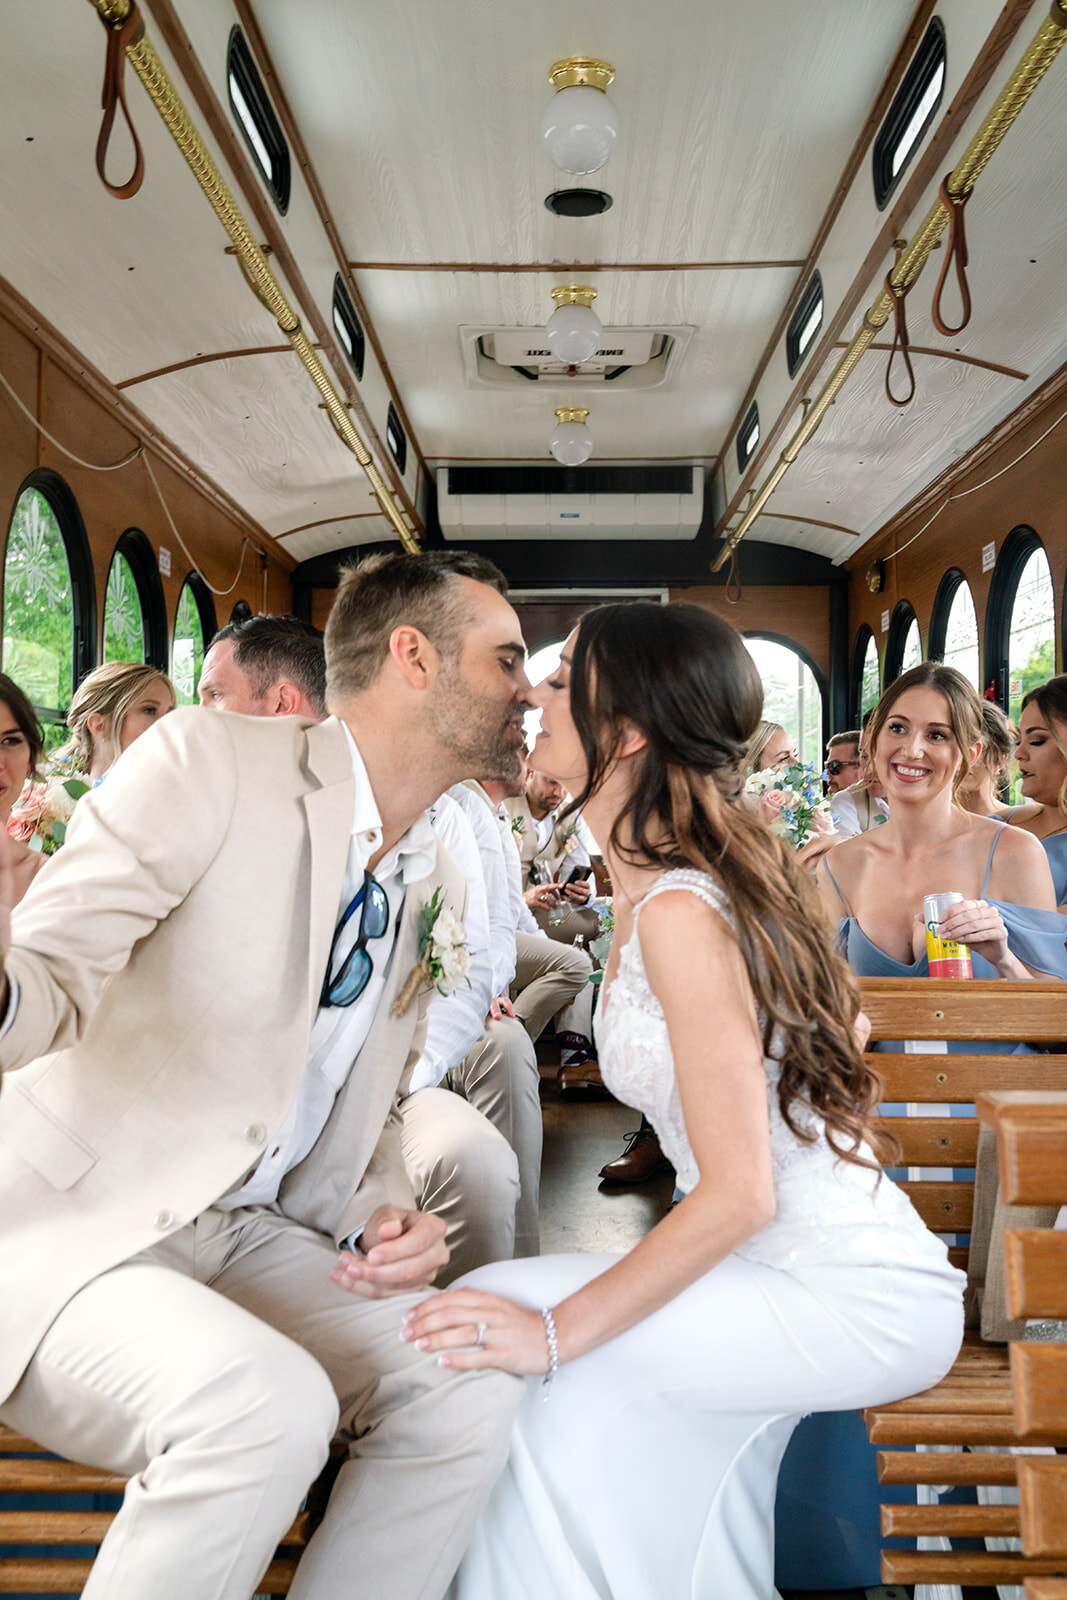 Inside the trolley, the bride and groom sit facing each other, holding hands, and sharing a kiss, surrounded by their bridal party.